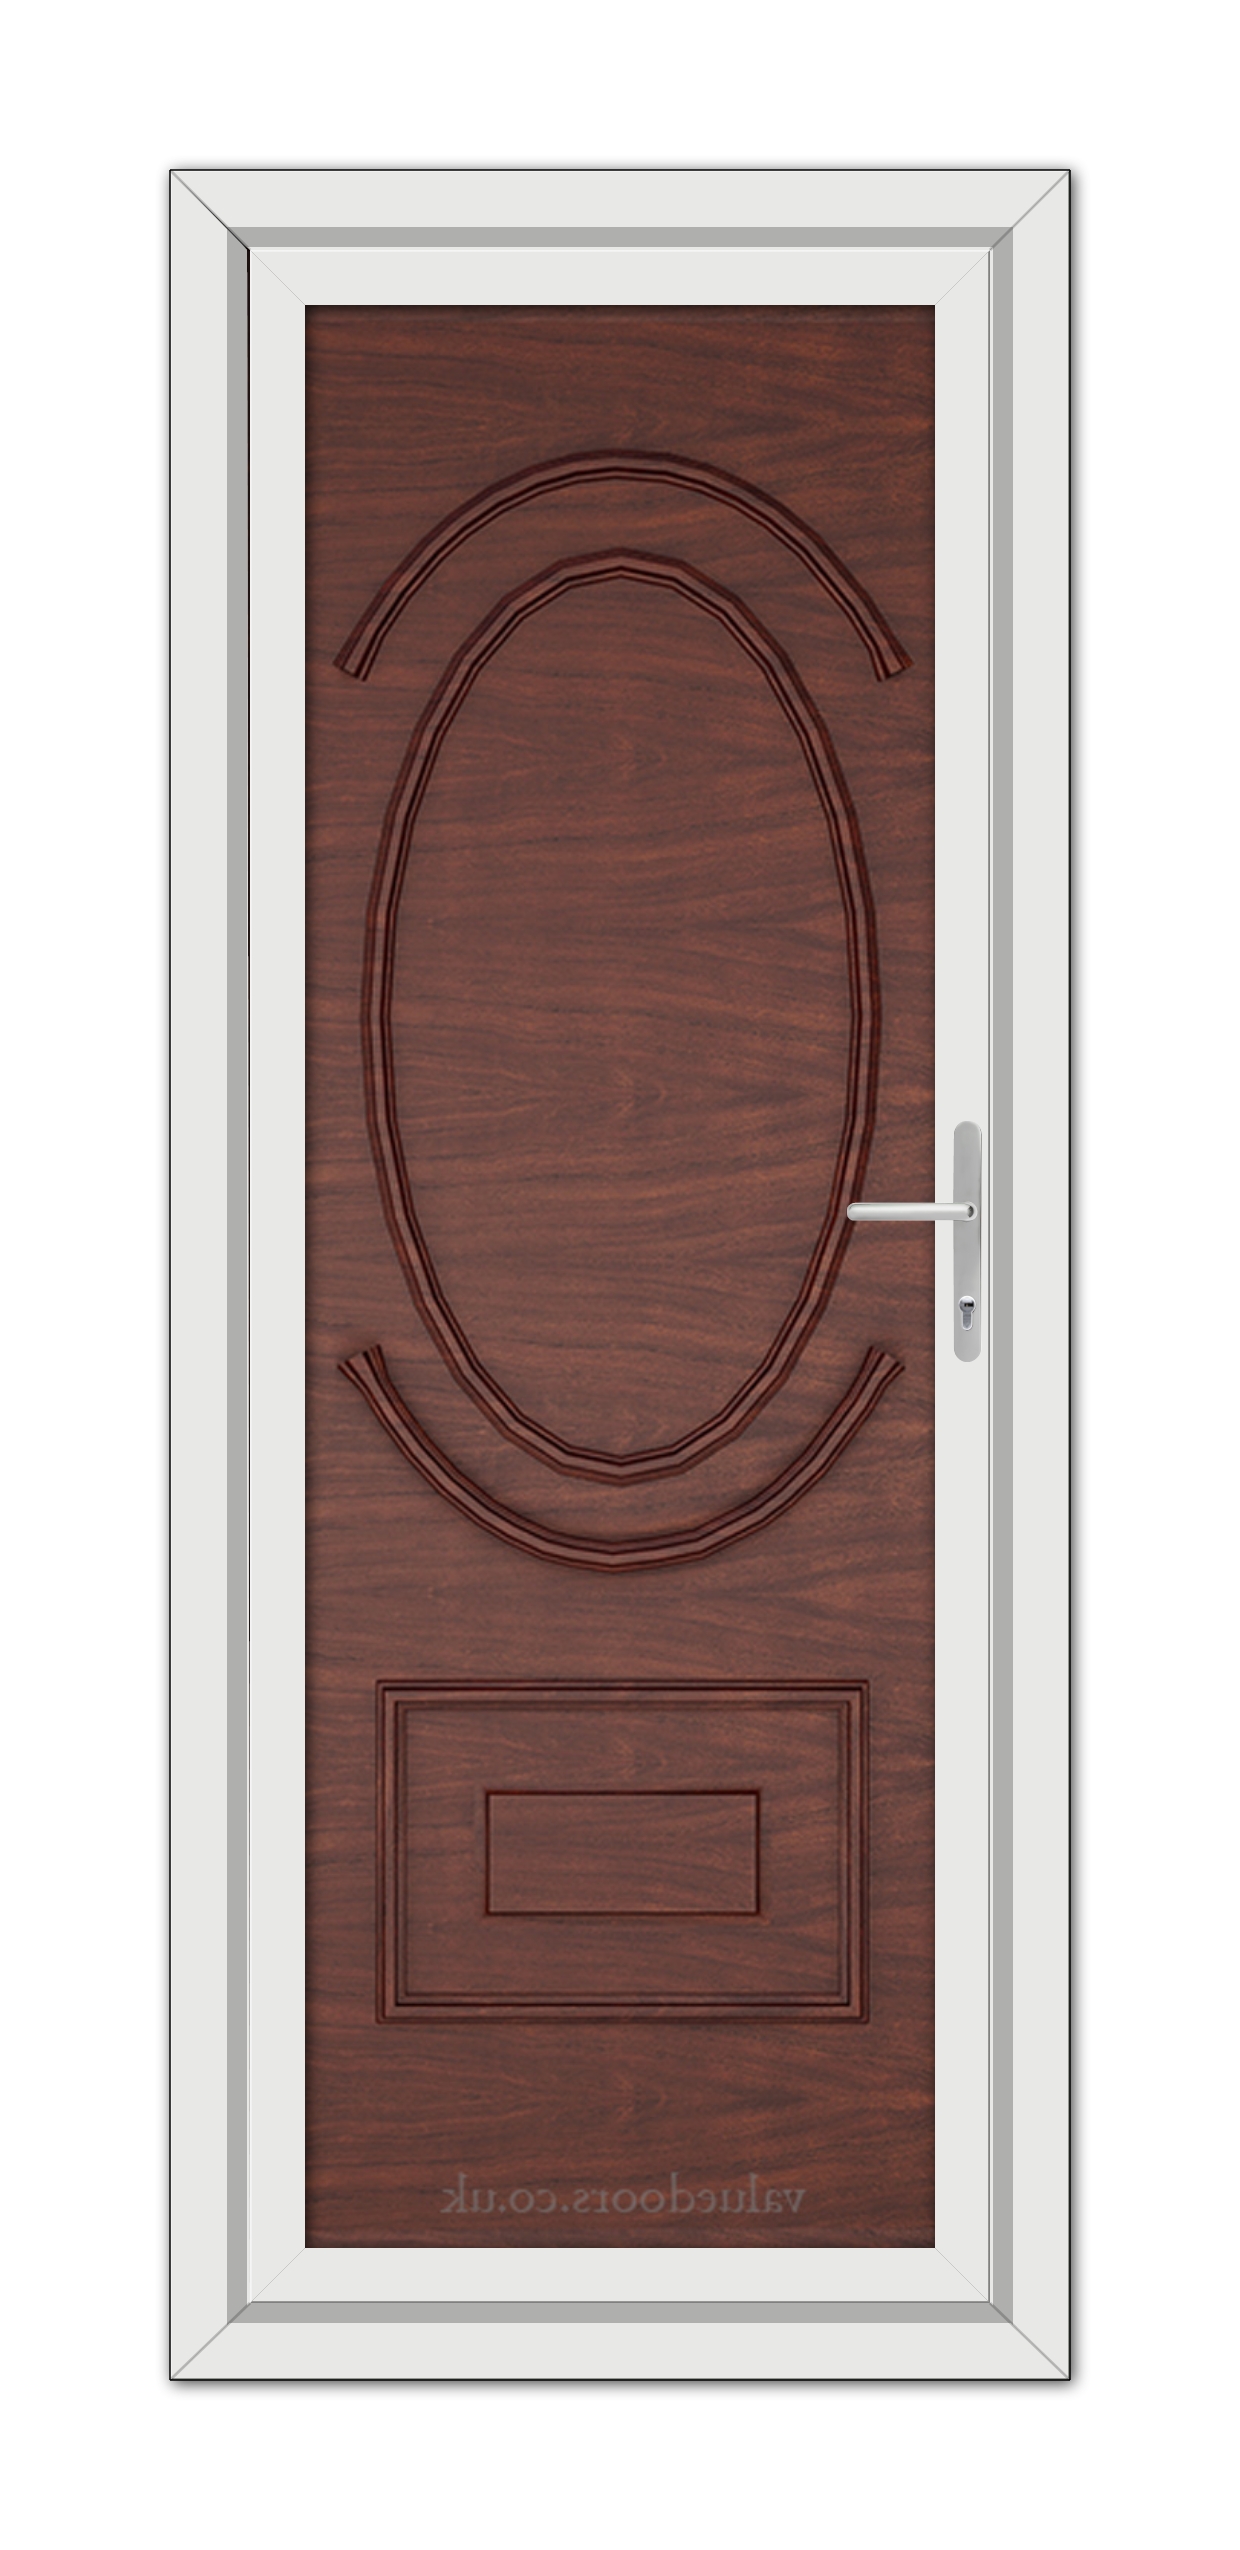 A Rosewood Richmond Solid uPVC Door with an oval glass panel at the top, a rectangular panel at the bottom, and a metal handle, set within a white frame.